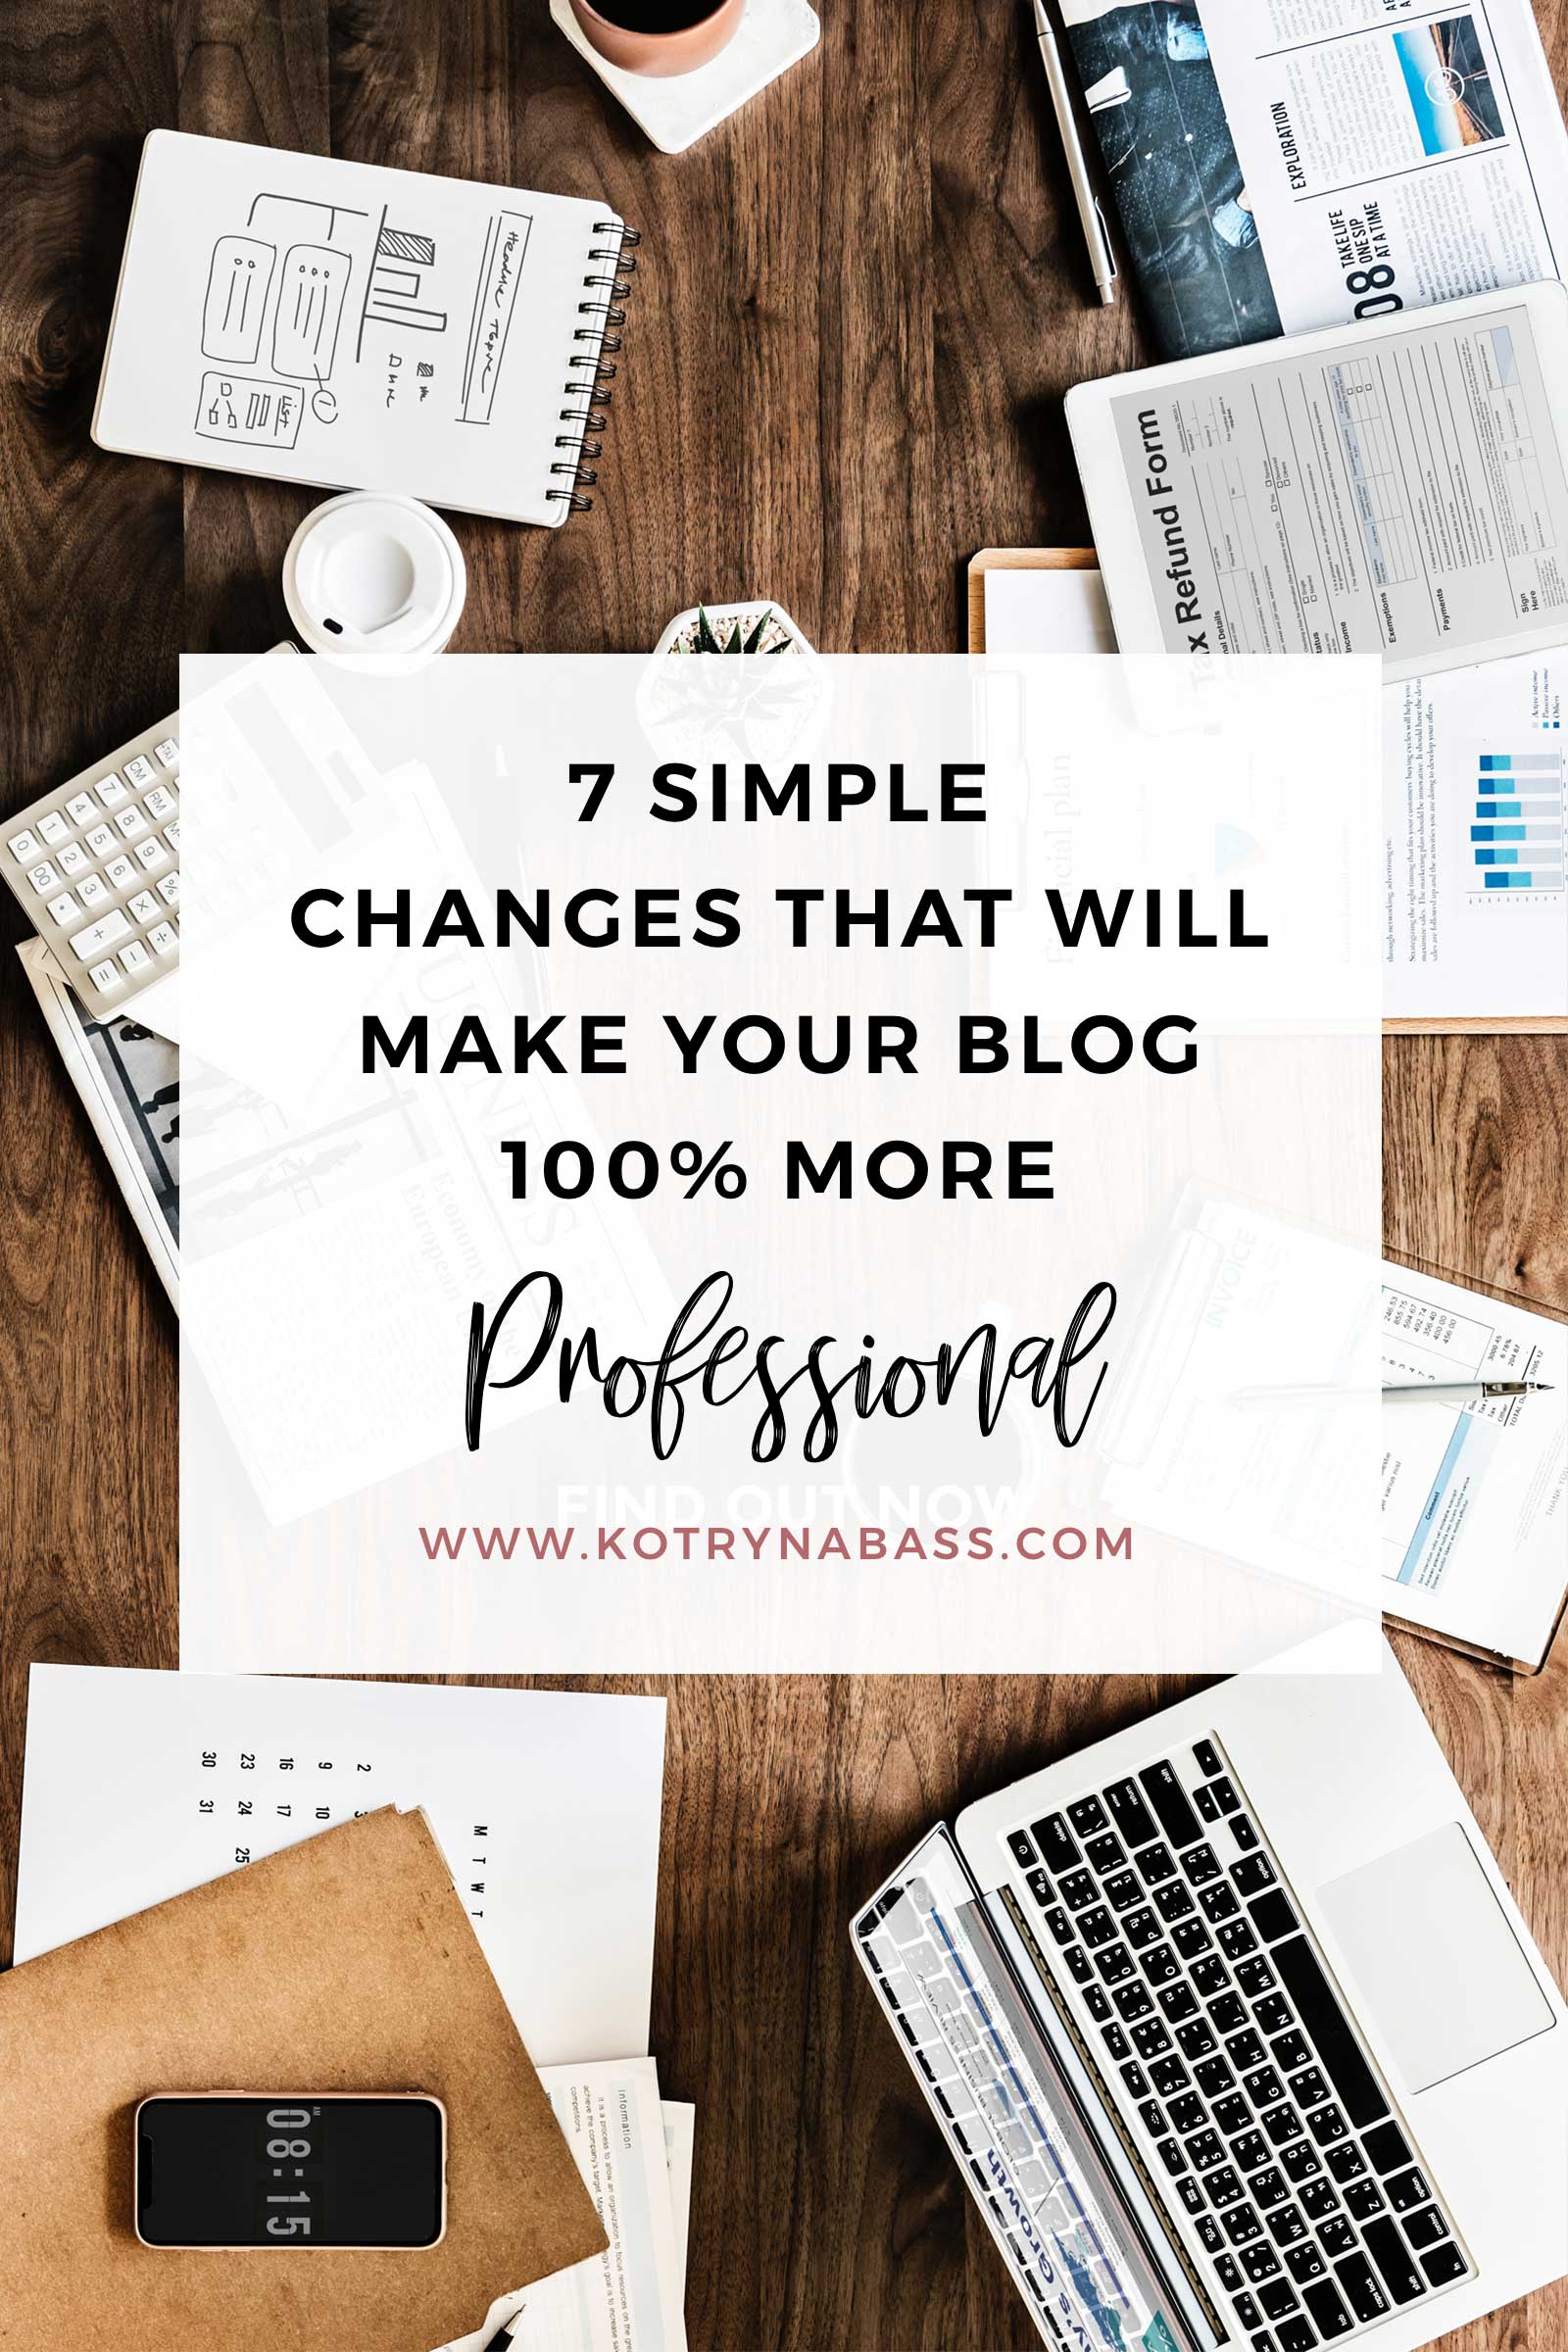 So you've been blogging for a while now, but nobody seems to be taking you seriously? Find out seven simple tricks all professional bloggers use & take your blog to that new, professional level today.